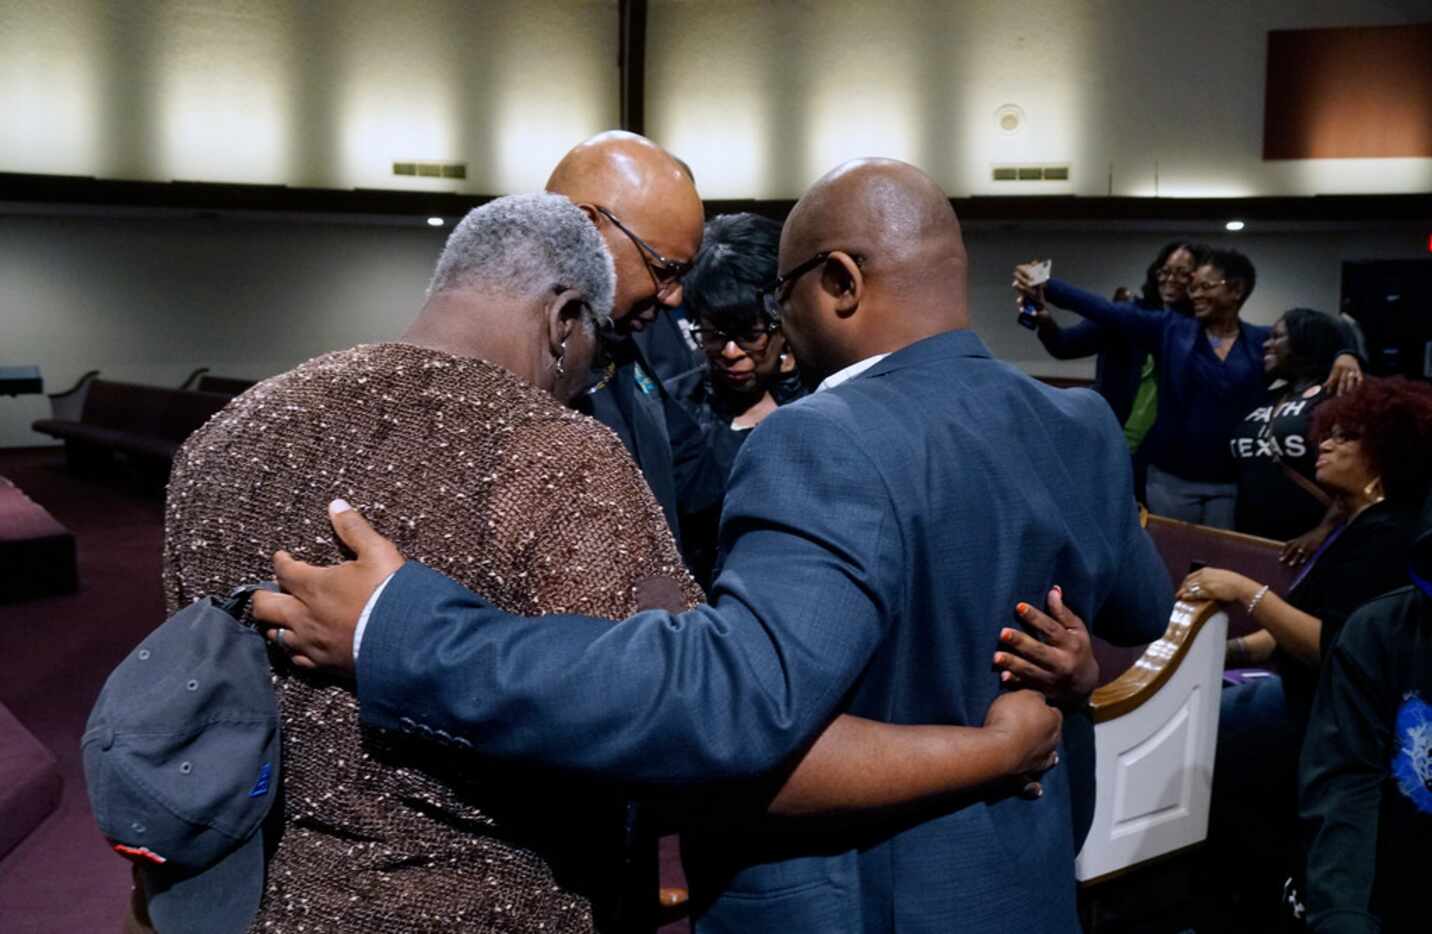 Prayer went on throughout the Black Clergy Rally at City Temple Seventh Day Adventist Church...